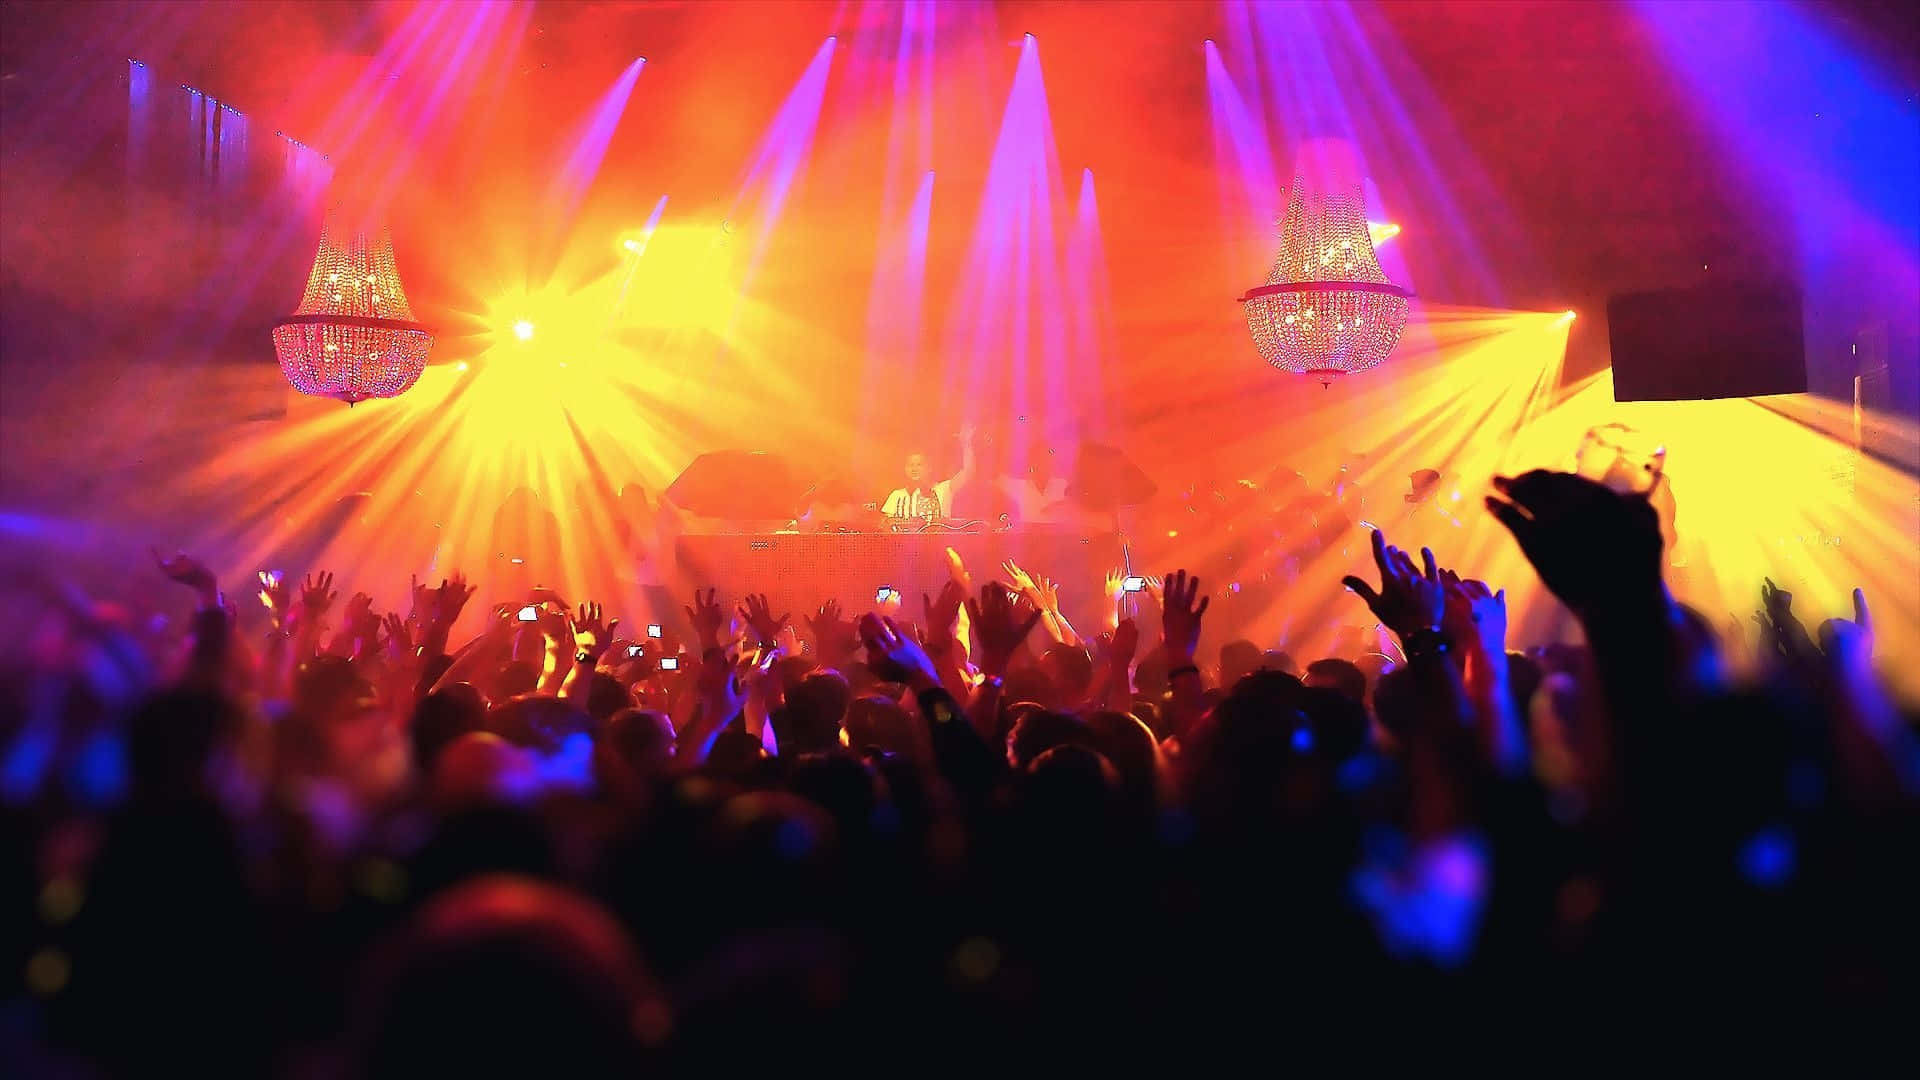 A Crowd At A Concert With Bright Lights